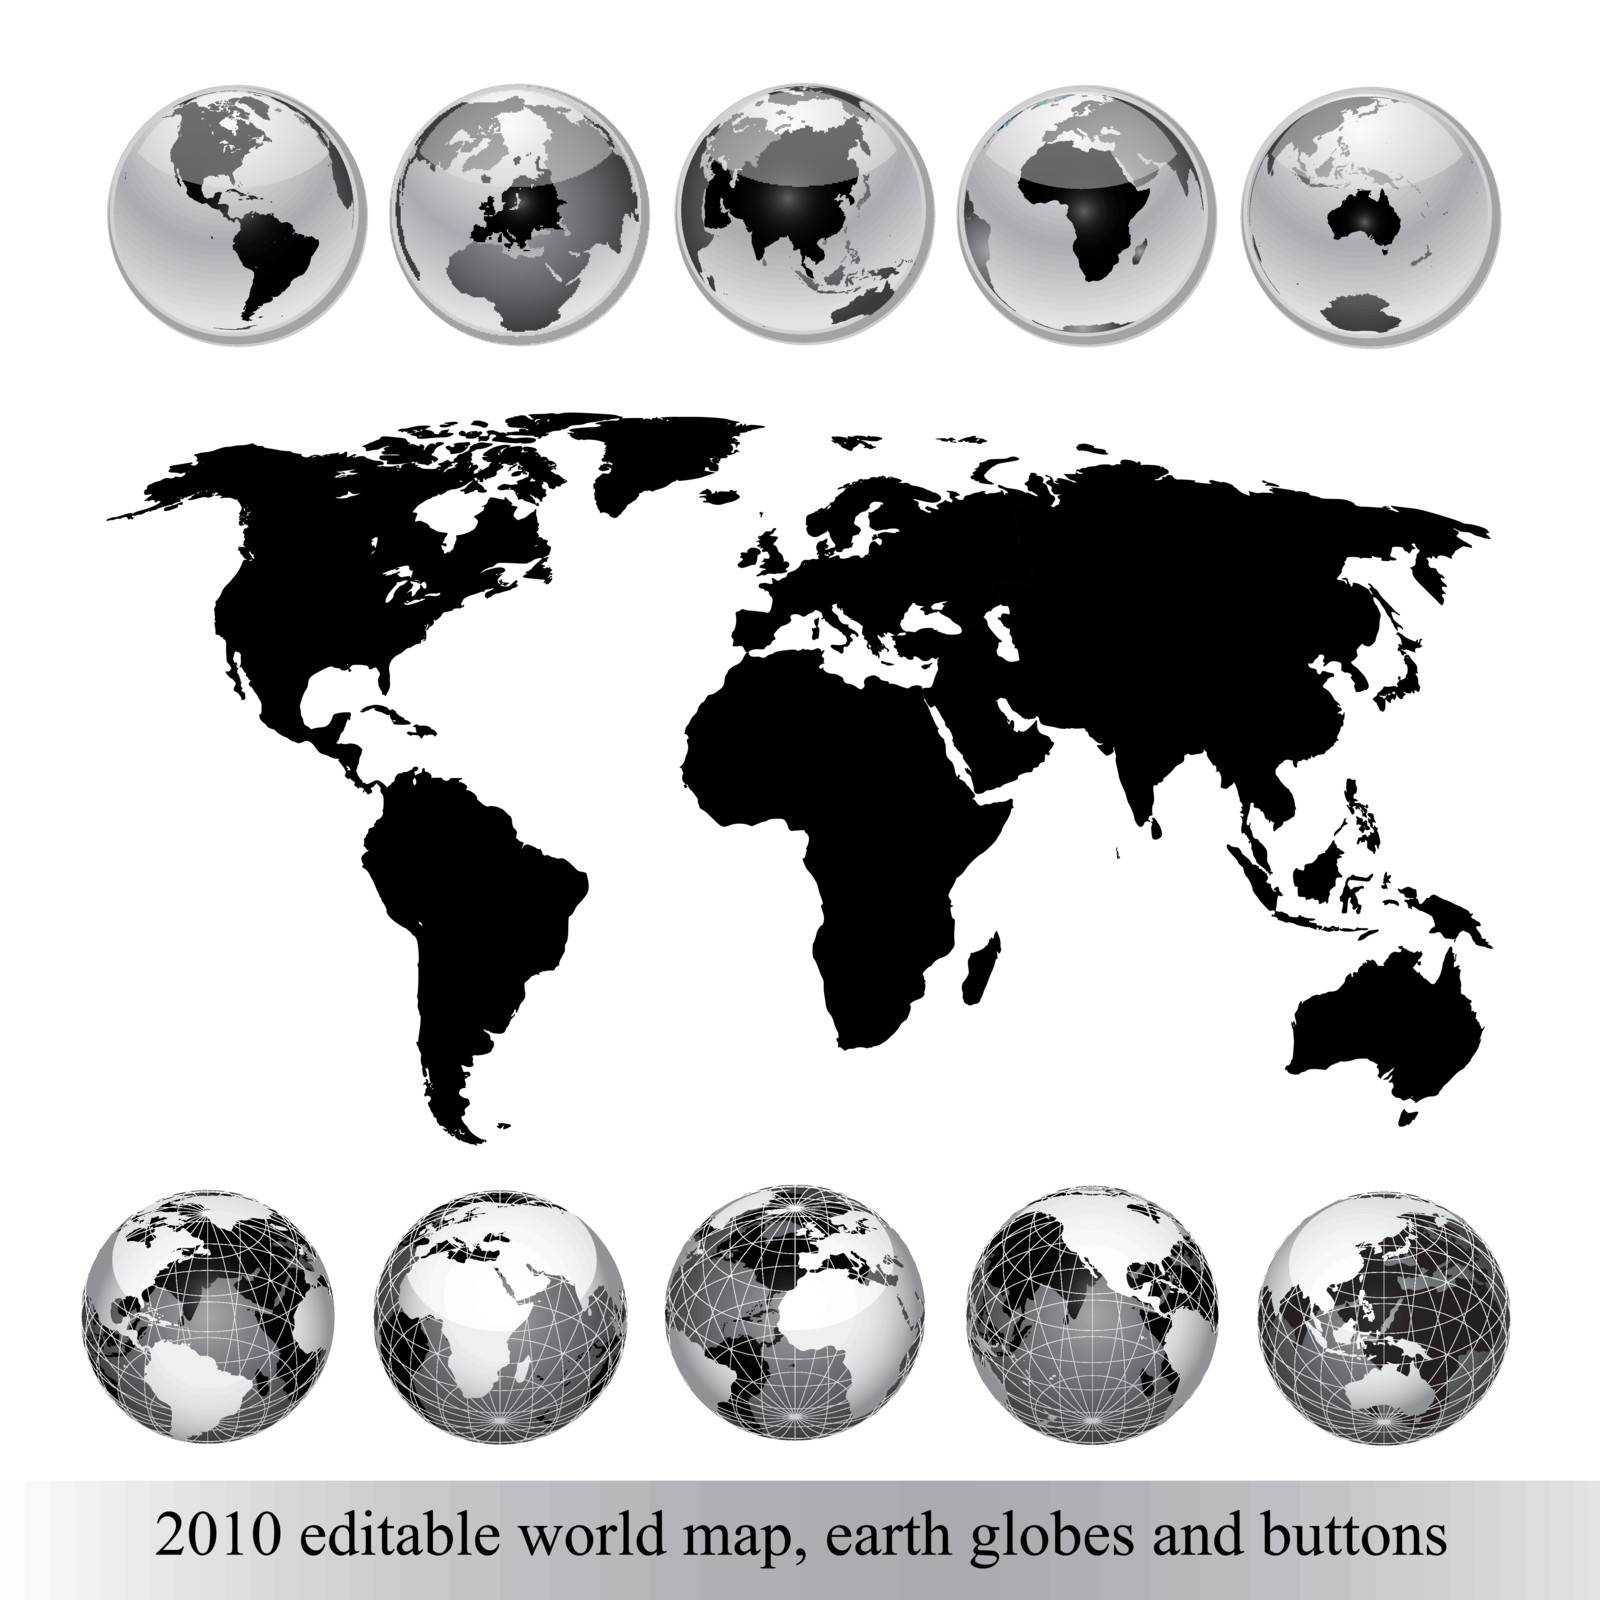 editable world map,earth globes and buttons by catrinel